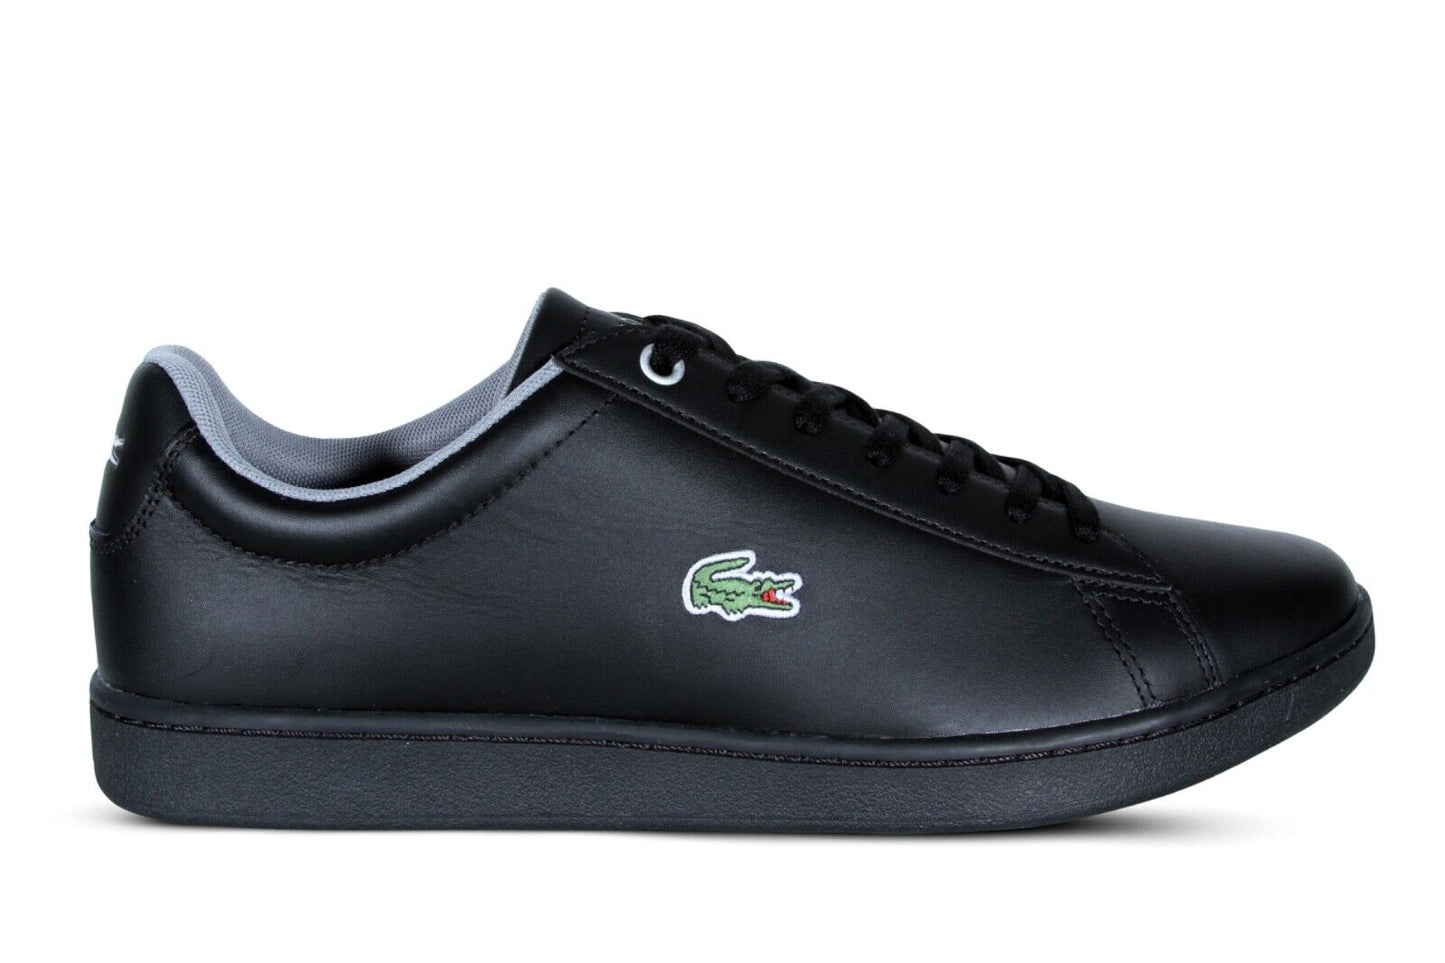 Lacoste Hydez 119 1 P SMA Men’s Sneakers in Black and Grey 737SMA0052231